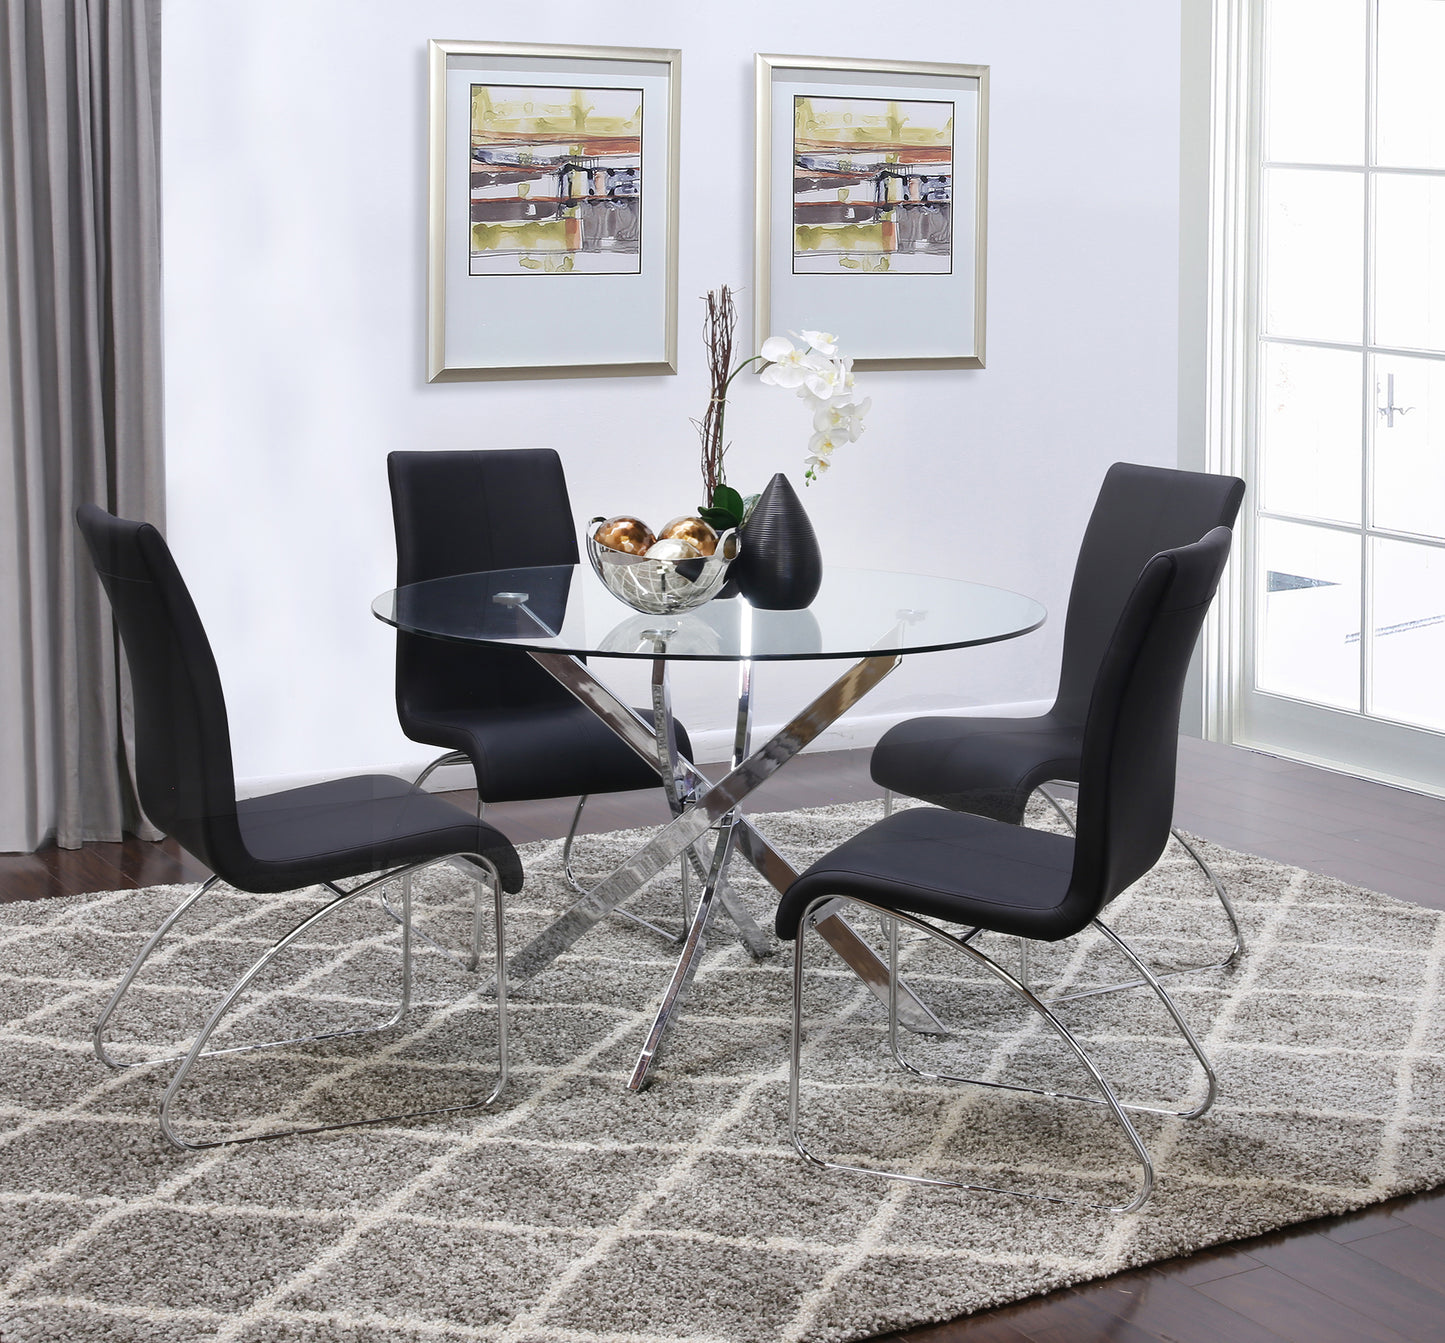 Lila 5 Piece Dining Set with Black Chairs